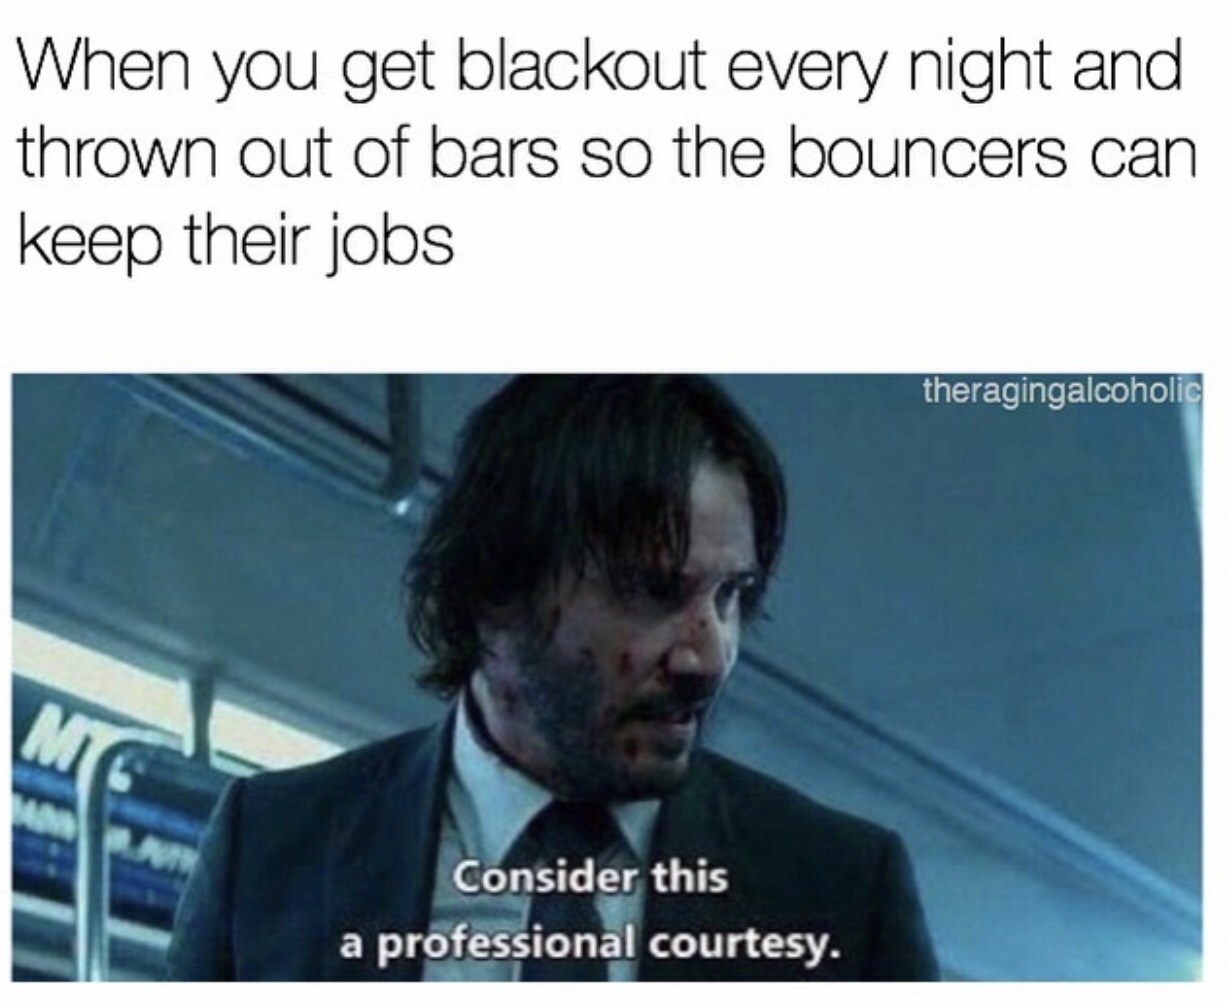 john wick professional courtesy meme - When you get blackout every night and thrown out of bars so the bouncers can keep their jobs theragingalcoholic Consider this a professional courtesy.